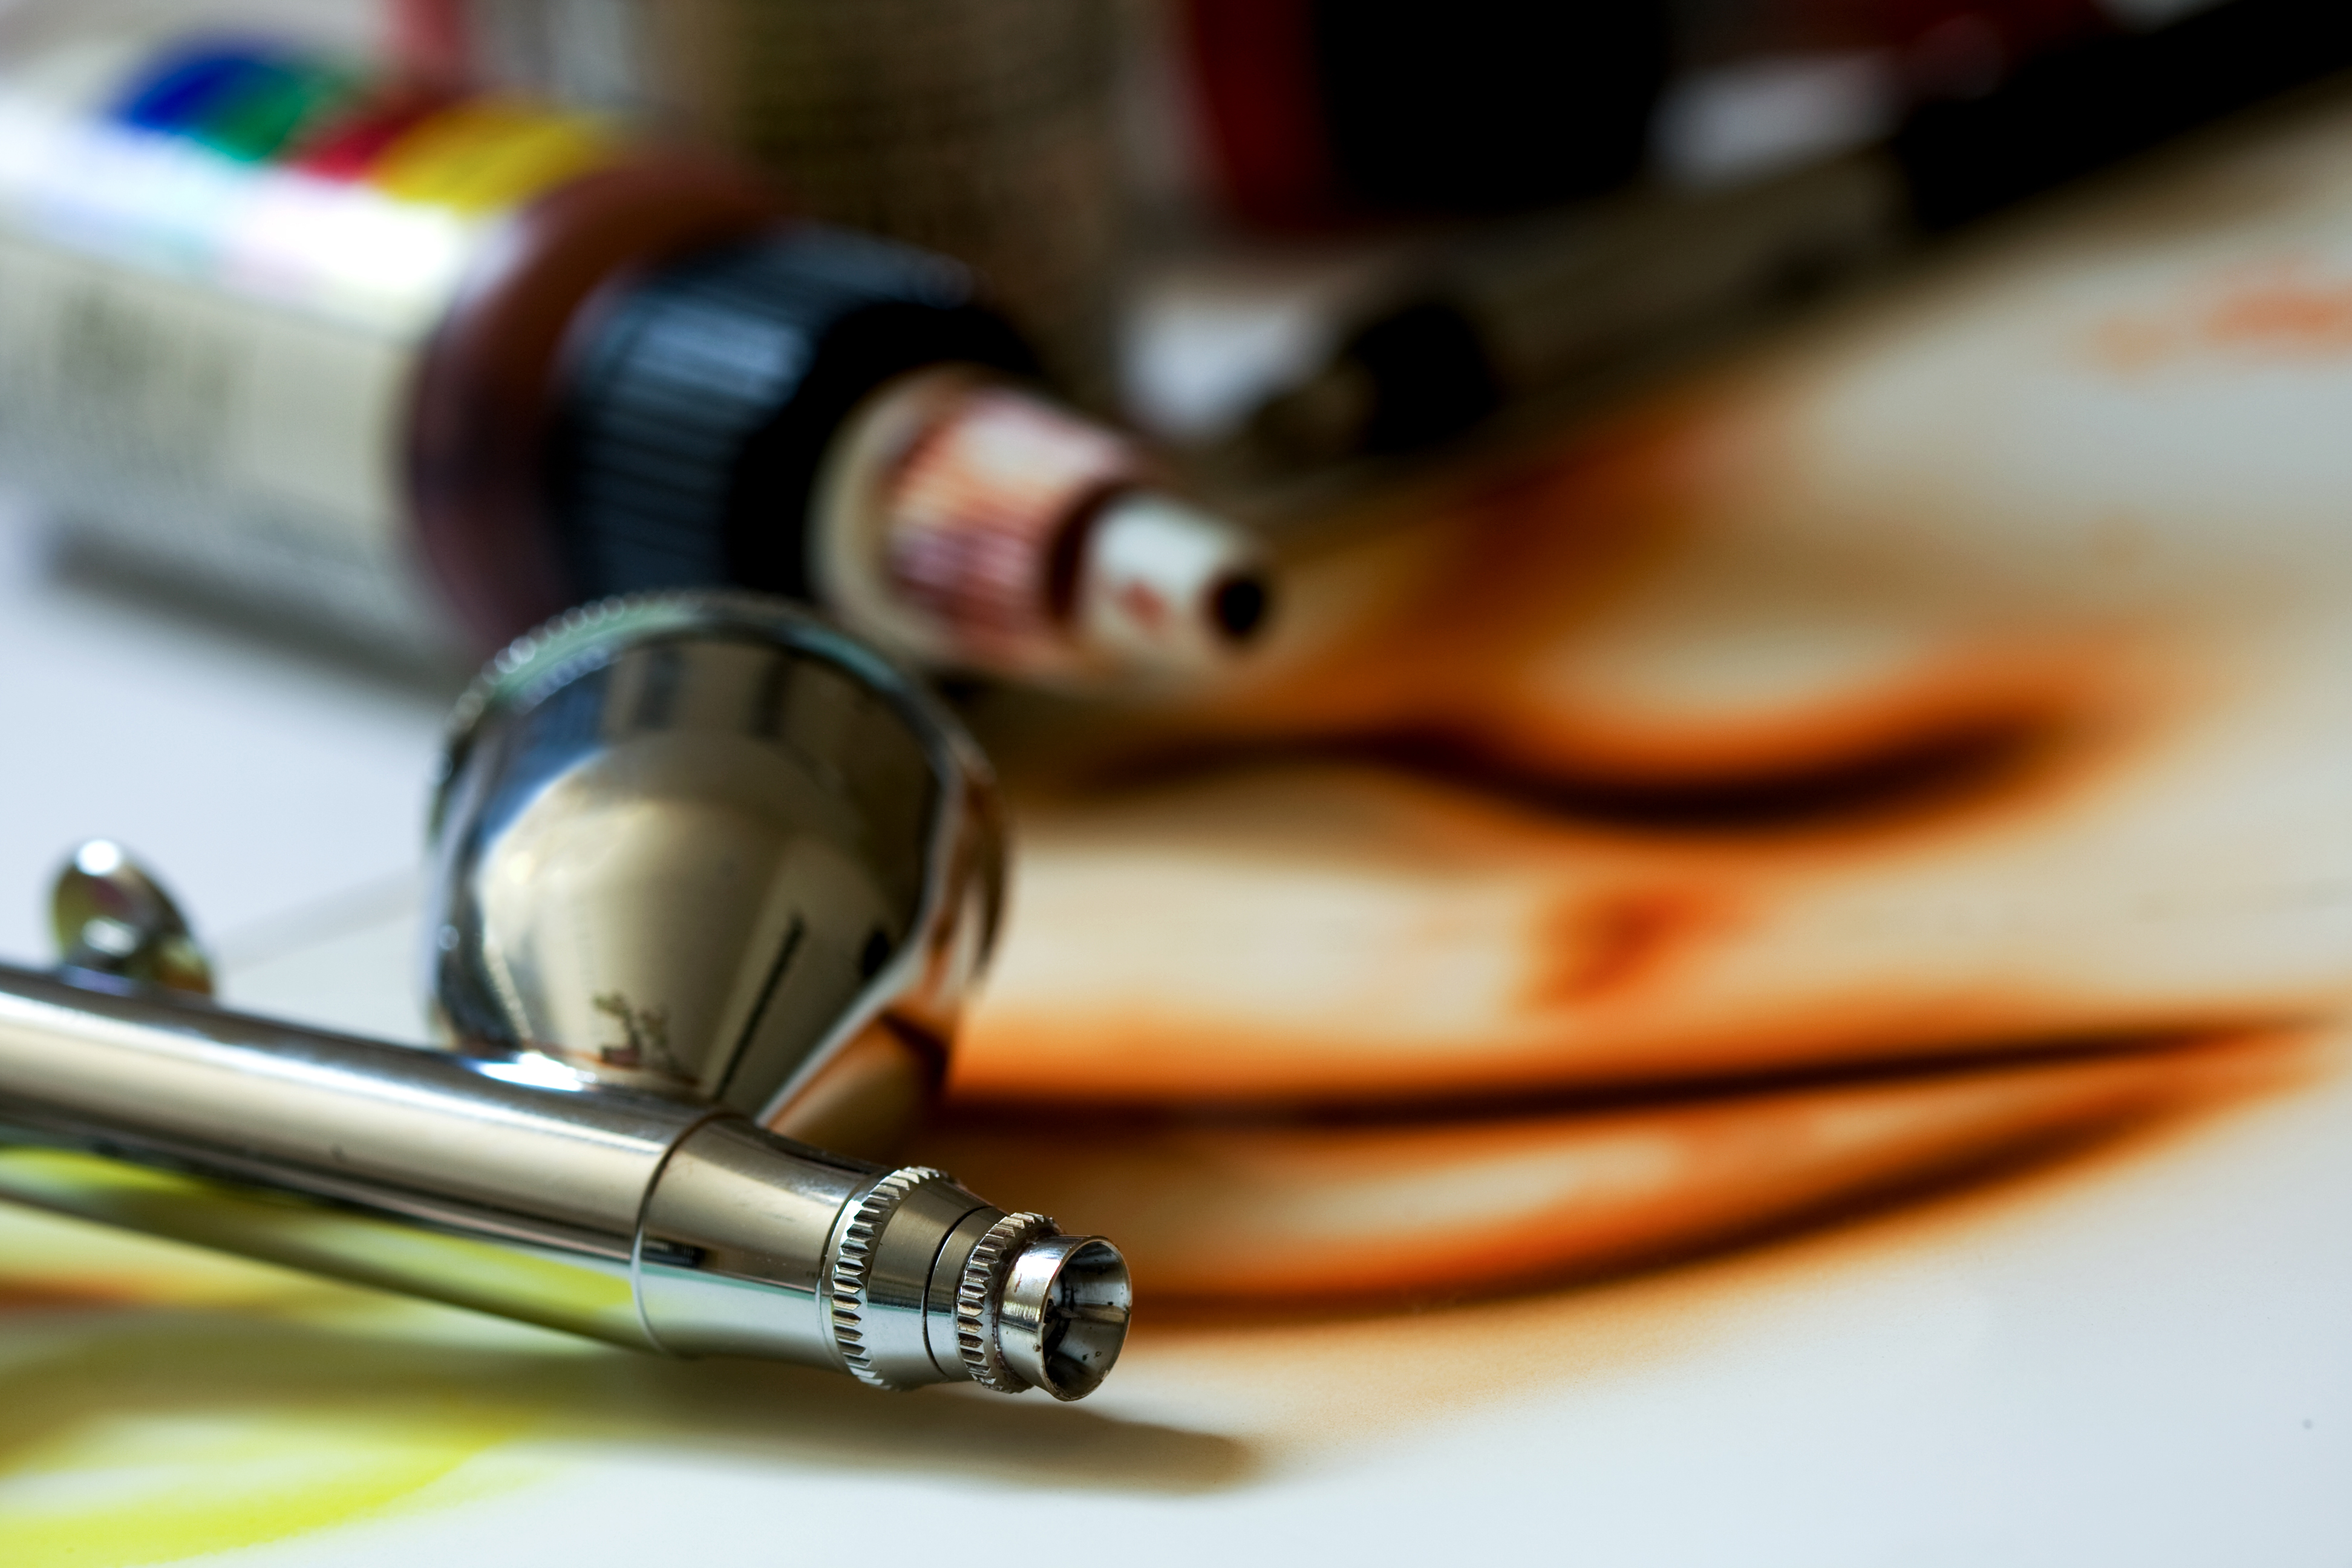 How to Make Your Own Air brush Acrylic Paint Thinner